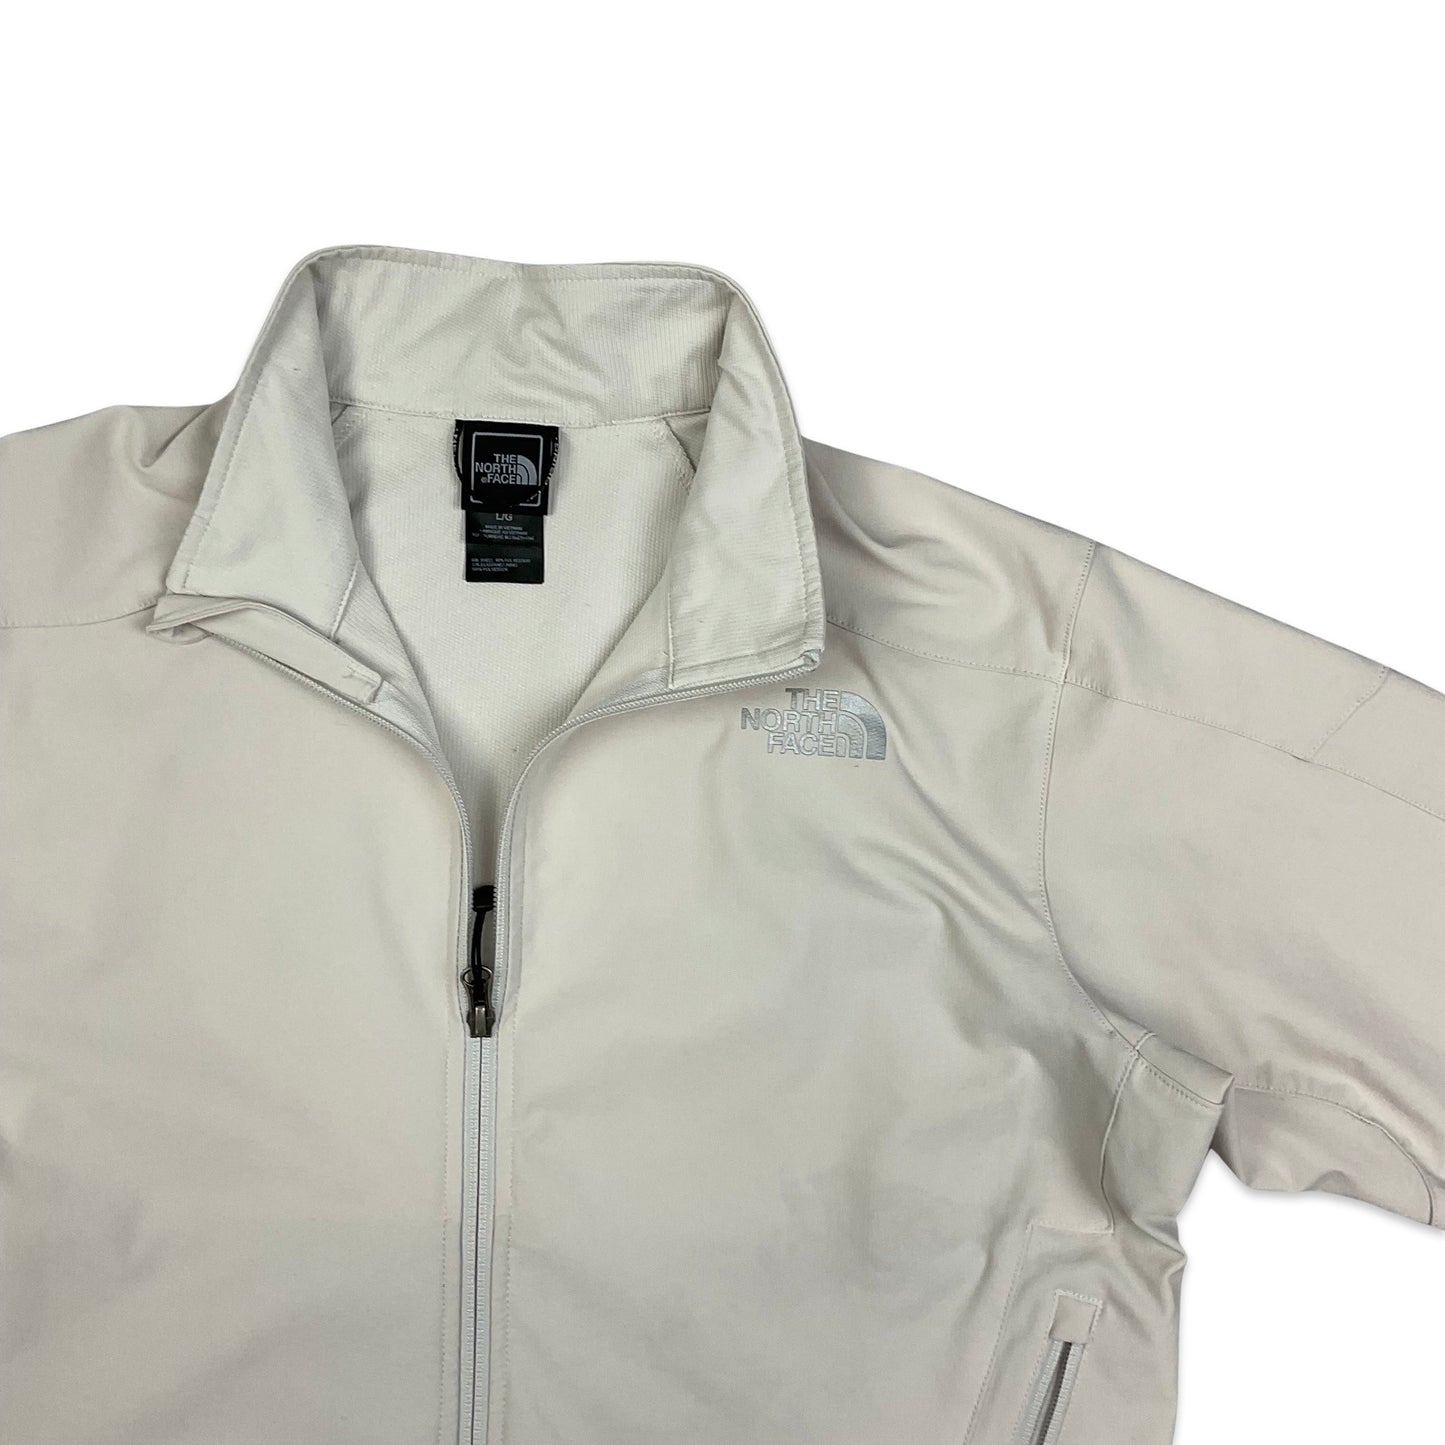 The North Face White Soft Shell Zip Up Jacket 16 18 20